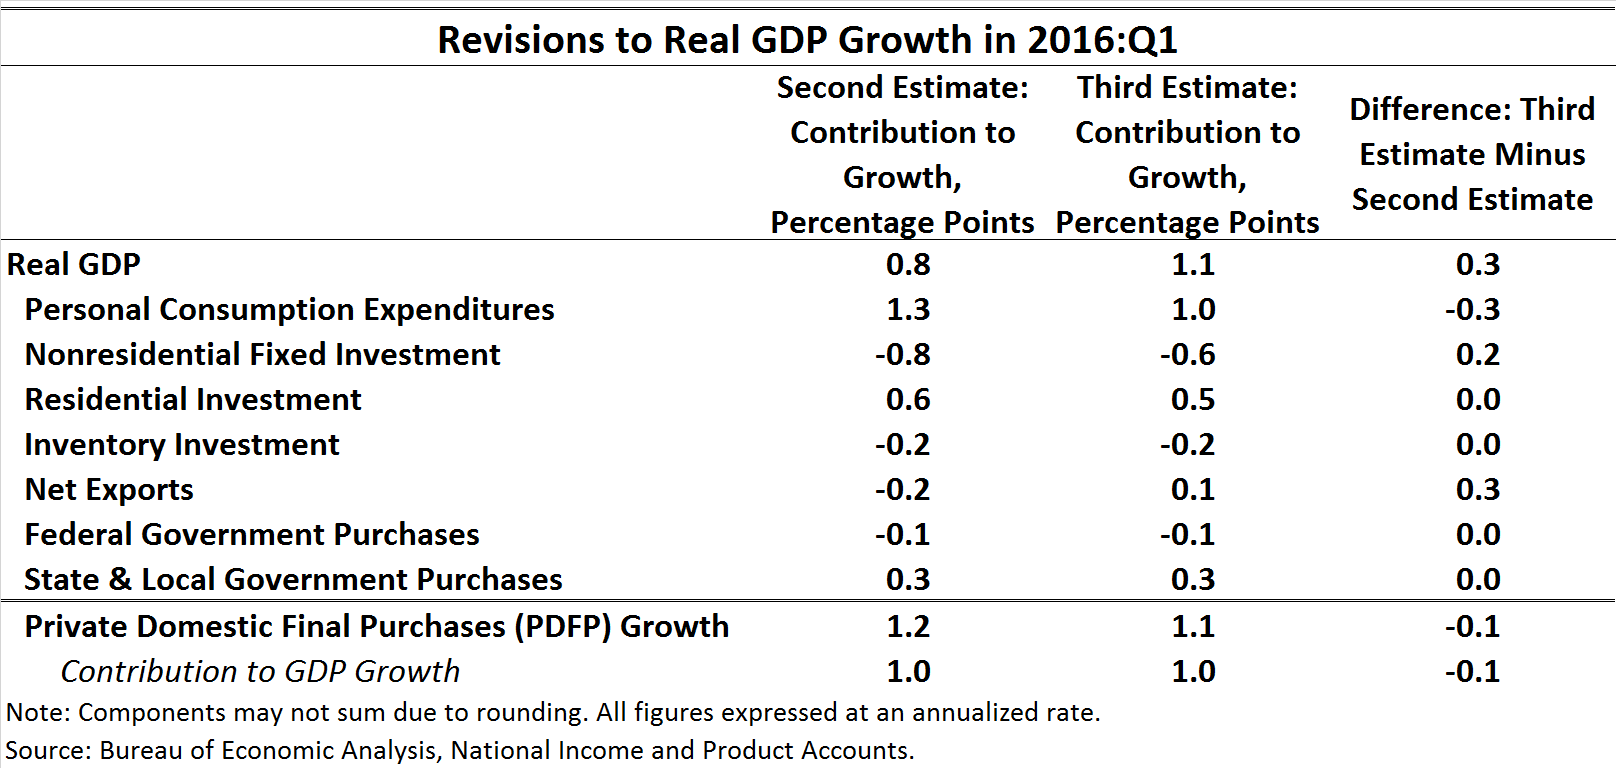 Revisions to Real GDP Growth in 2016:Q1